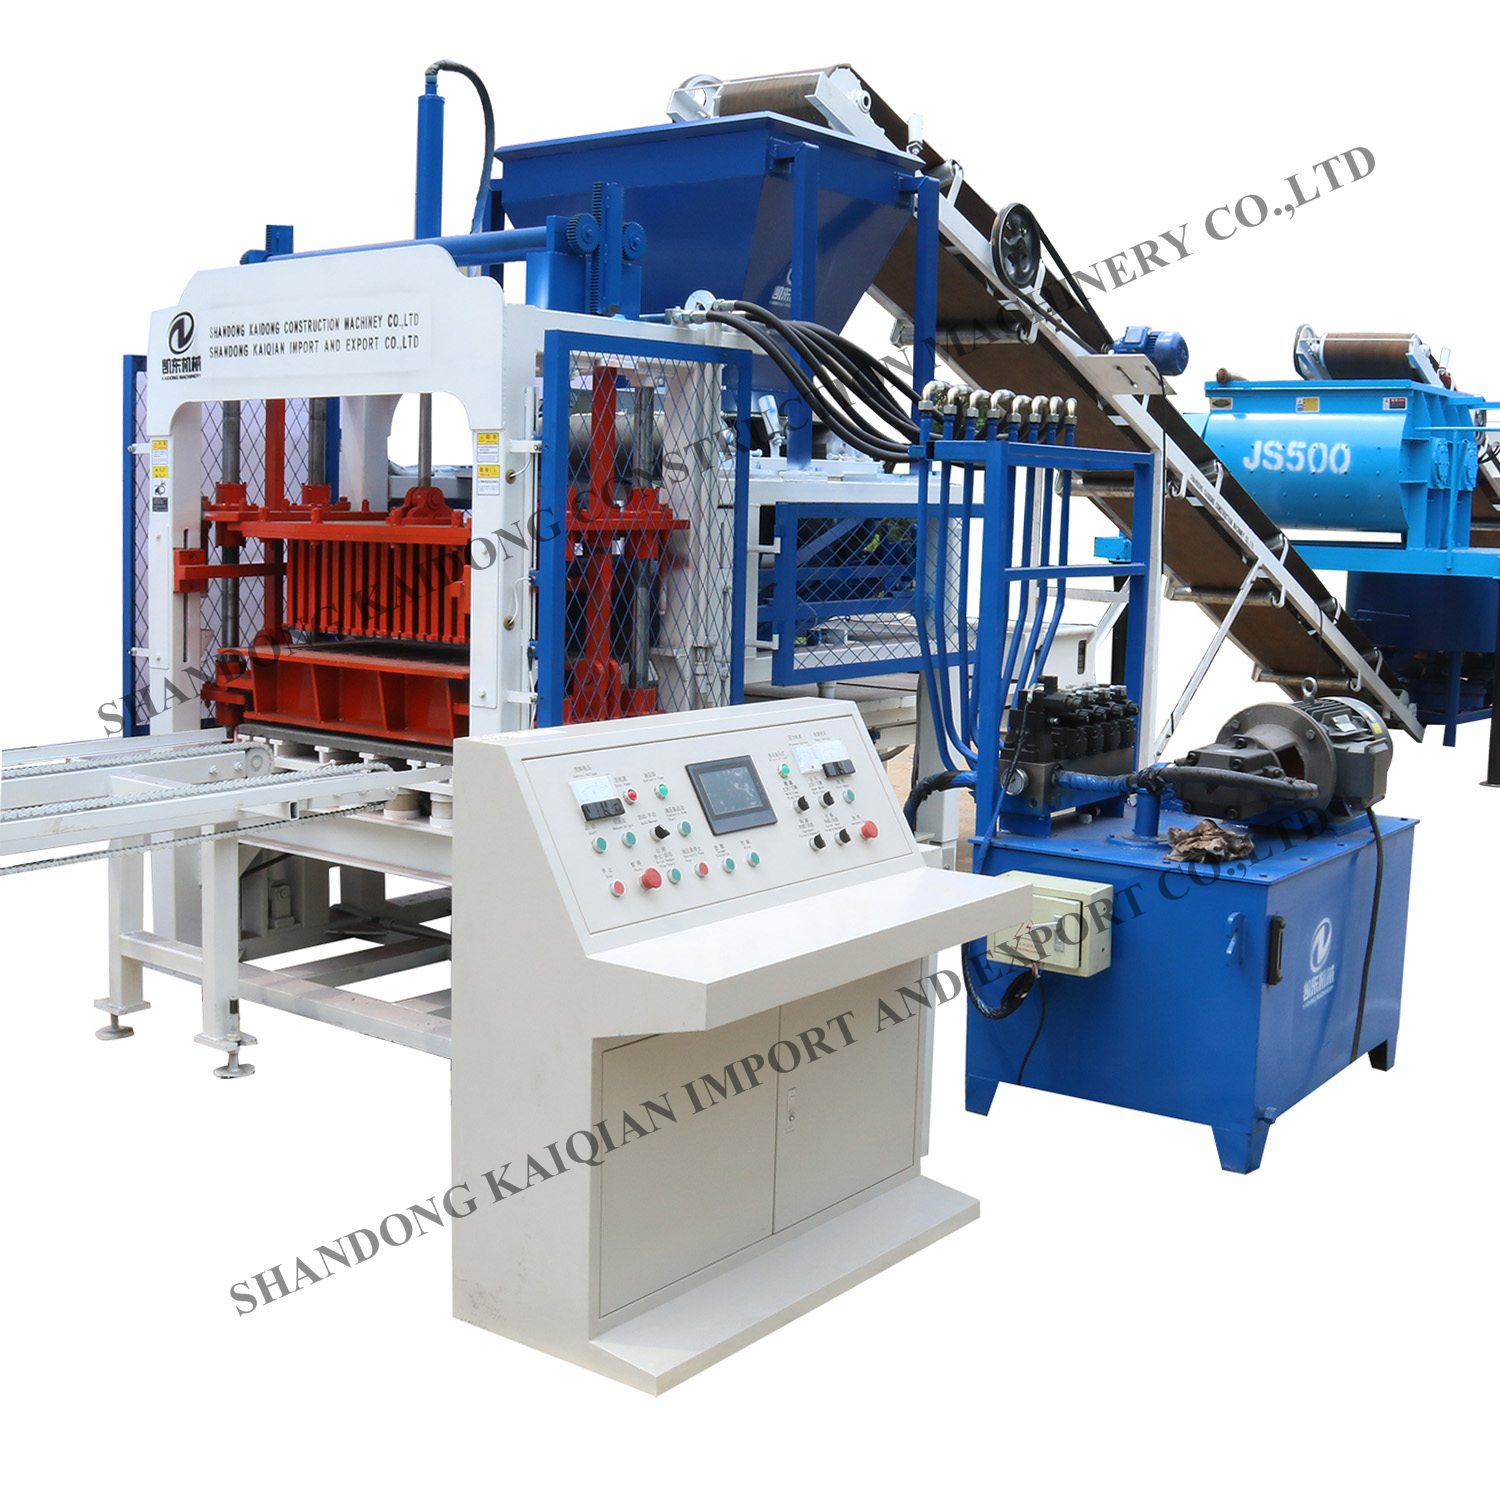 cement block making machine for indian concrete brick making machine fly ash brick making machine price in India